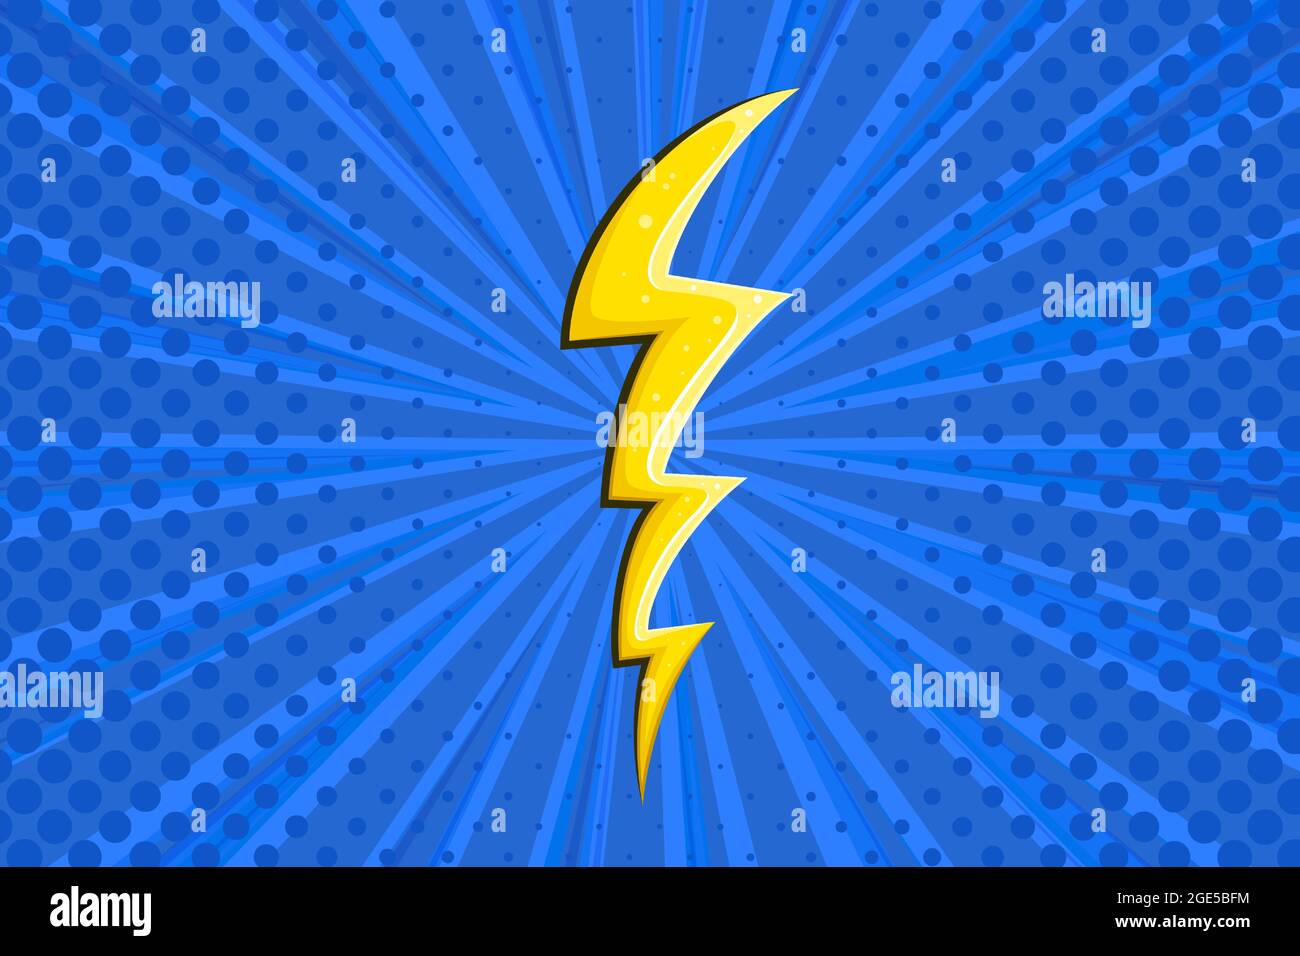 Premium Vector  A blue and yellow pattern with lightning bolts